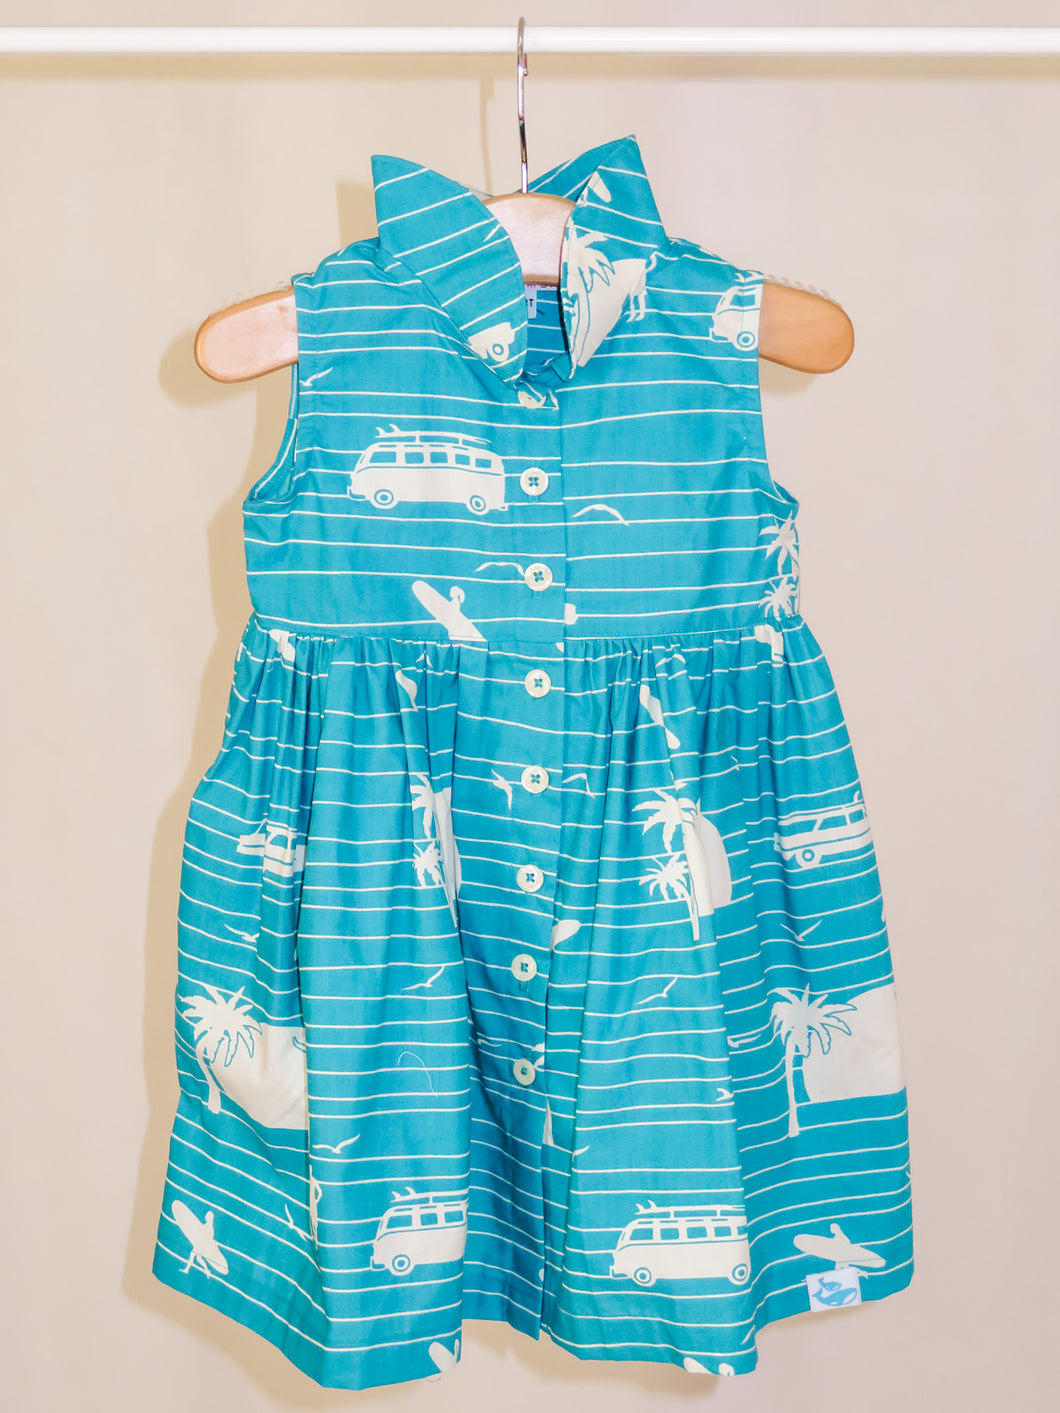 Our playful, button-up dress has just the right amount of poof and twirl.  The sleeveless style lets your child play with ease and we even added pockets so your littles can stow away their treasures.